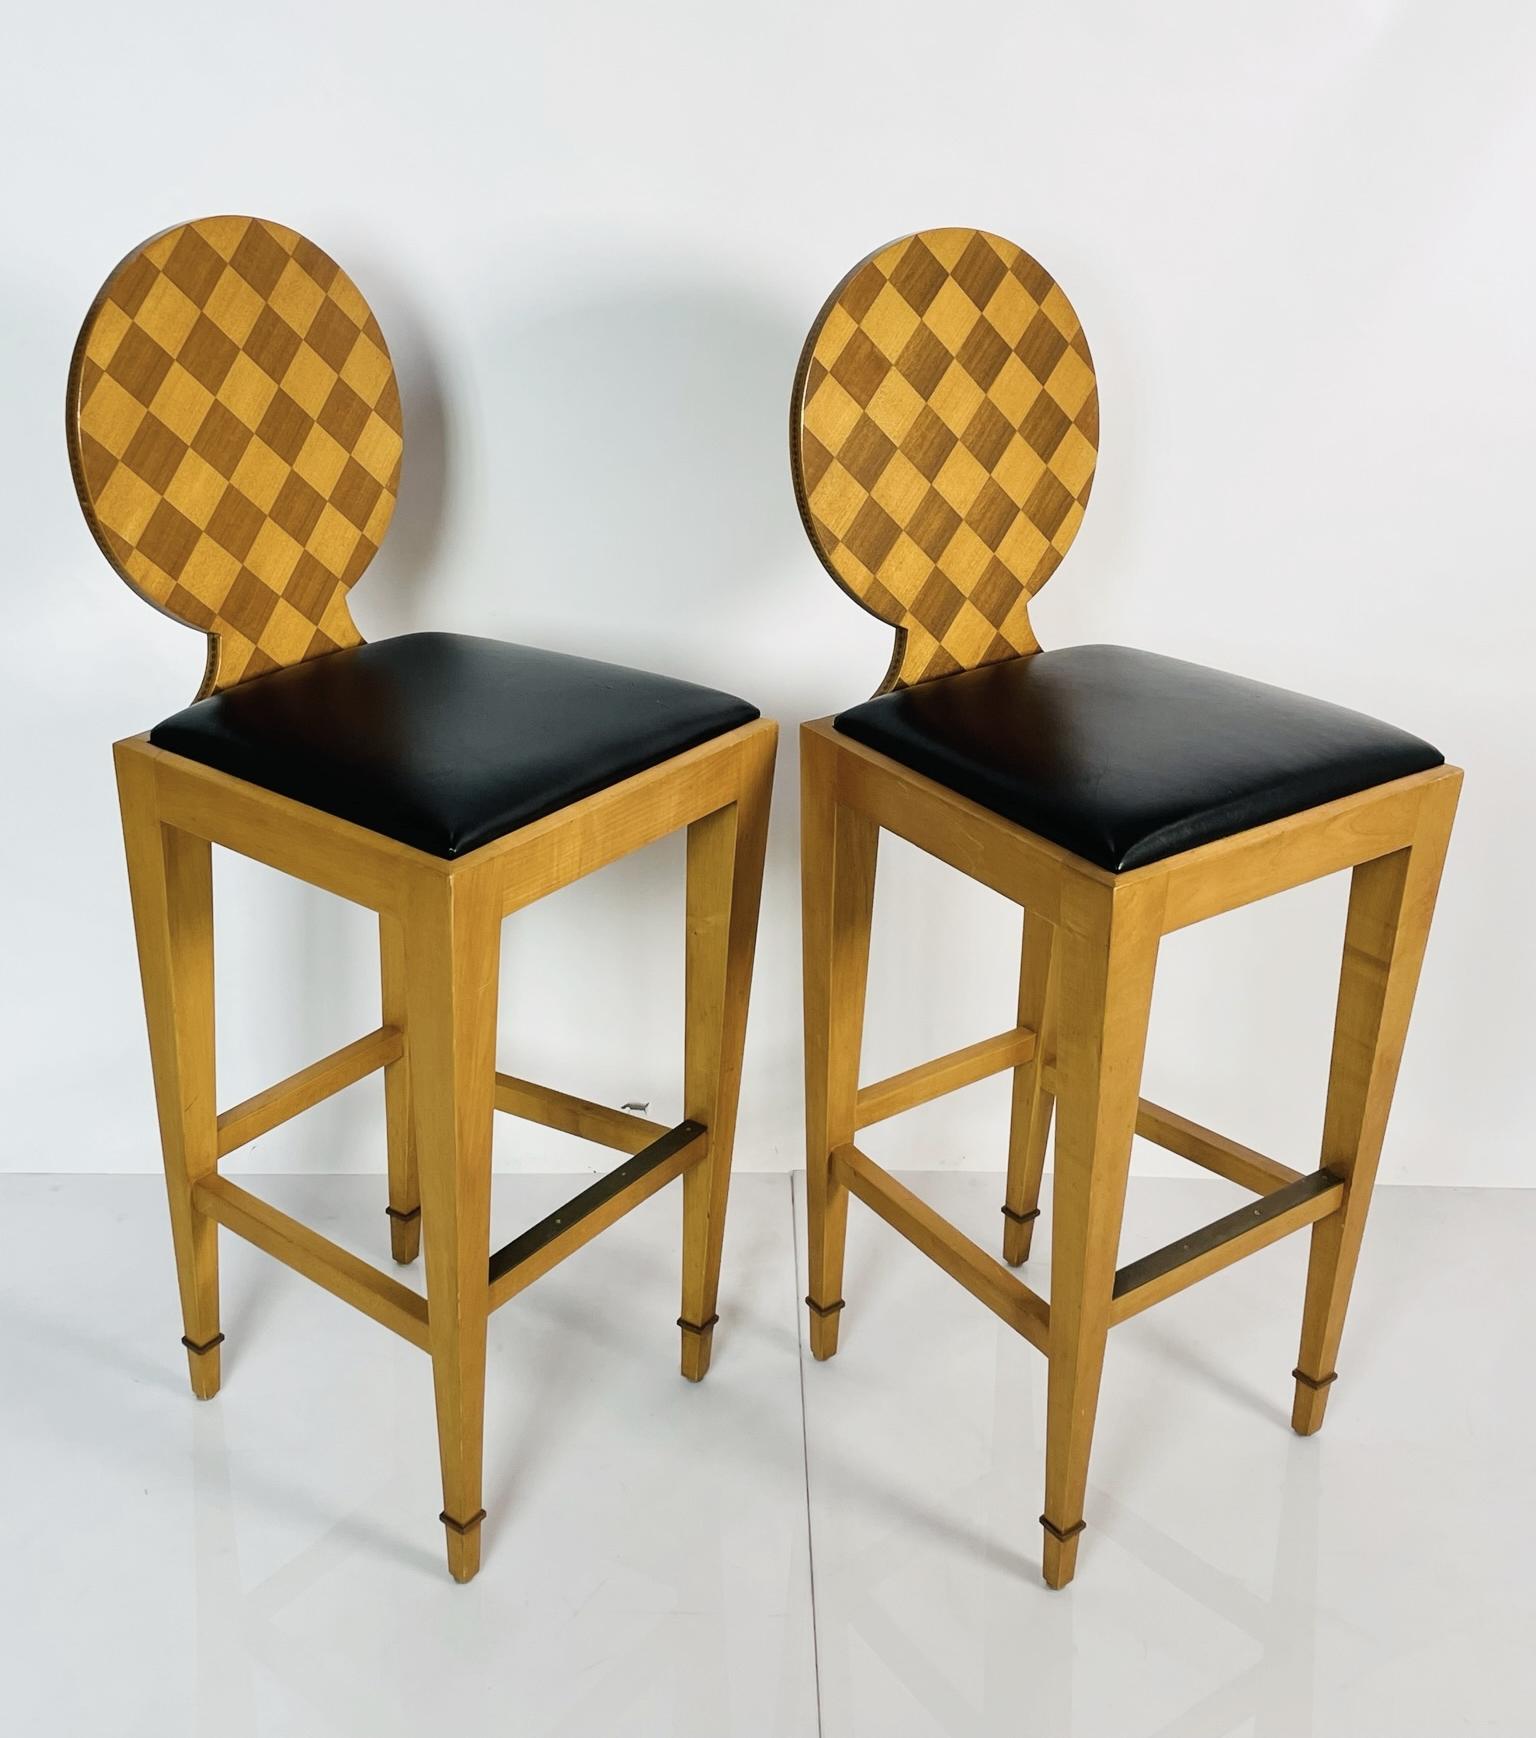 Beautiful pair of barstools designed and manfactured in the USA by John Hutton and manufactured by Donghia.
The barstools are part of the Paris Hall collection.

The stools are made in solid wood with checkered round backs and upholstered in